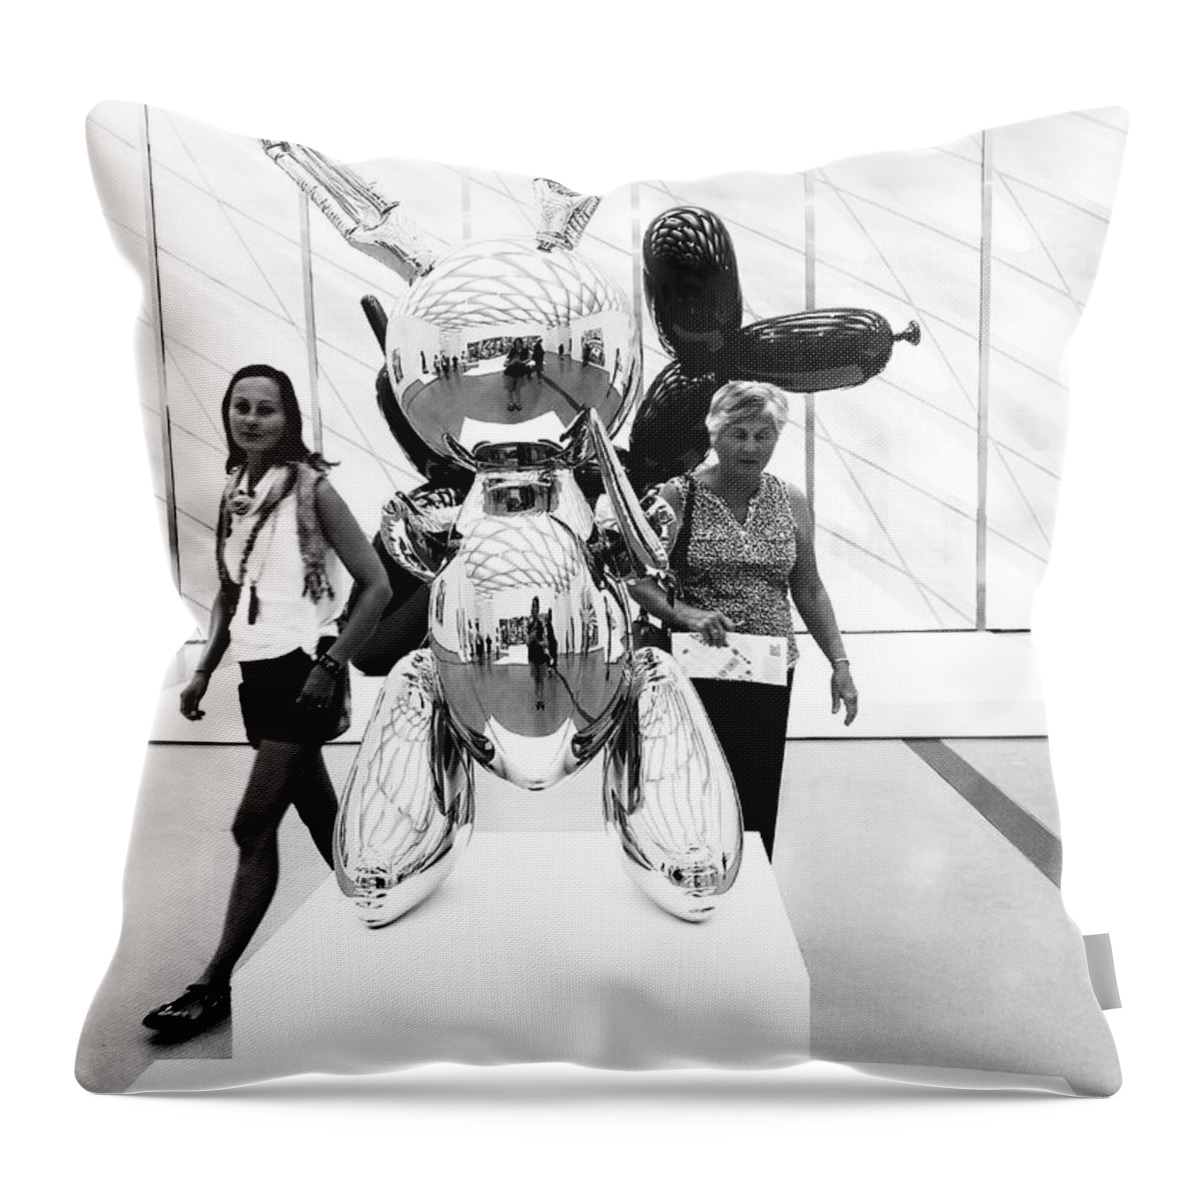 Self Throw Pillow featuring the photograph Self Portrait in Jeff Koons Mylar Rabbit Balloon Sculpture by Mary Capriole